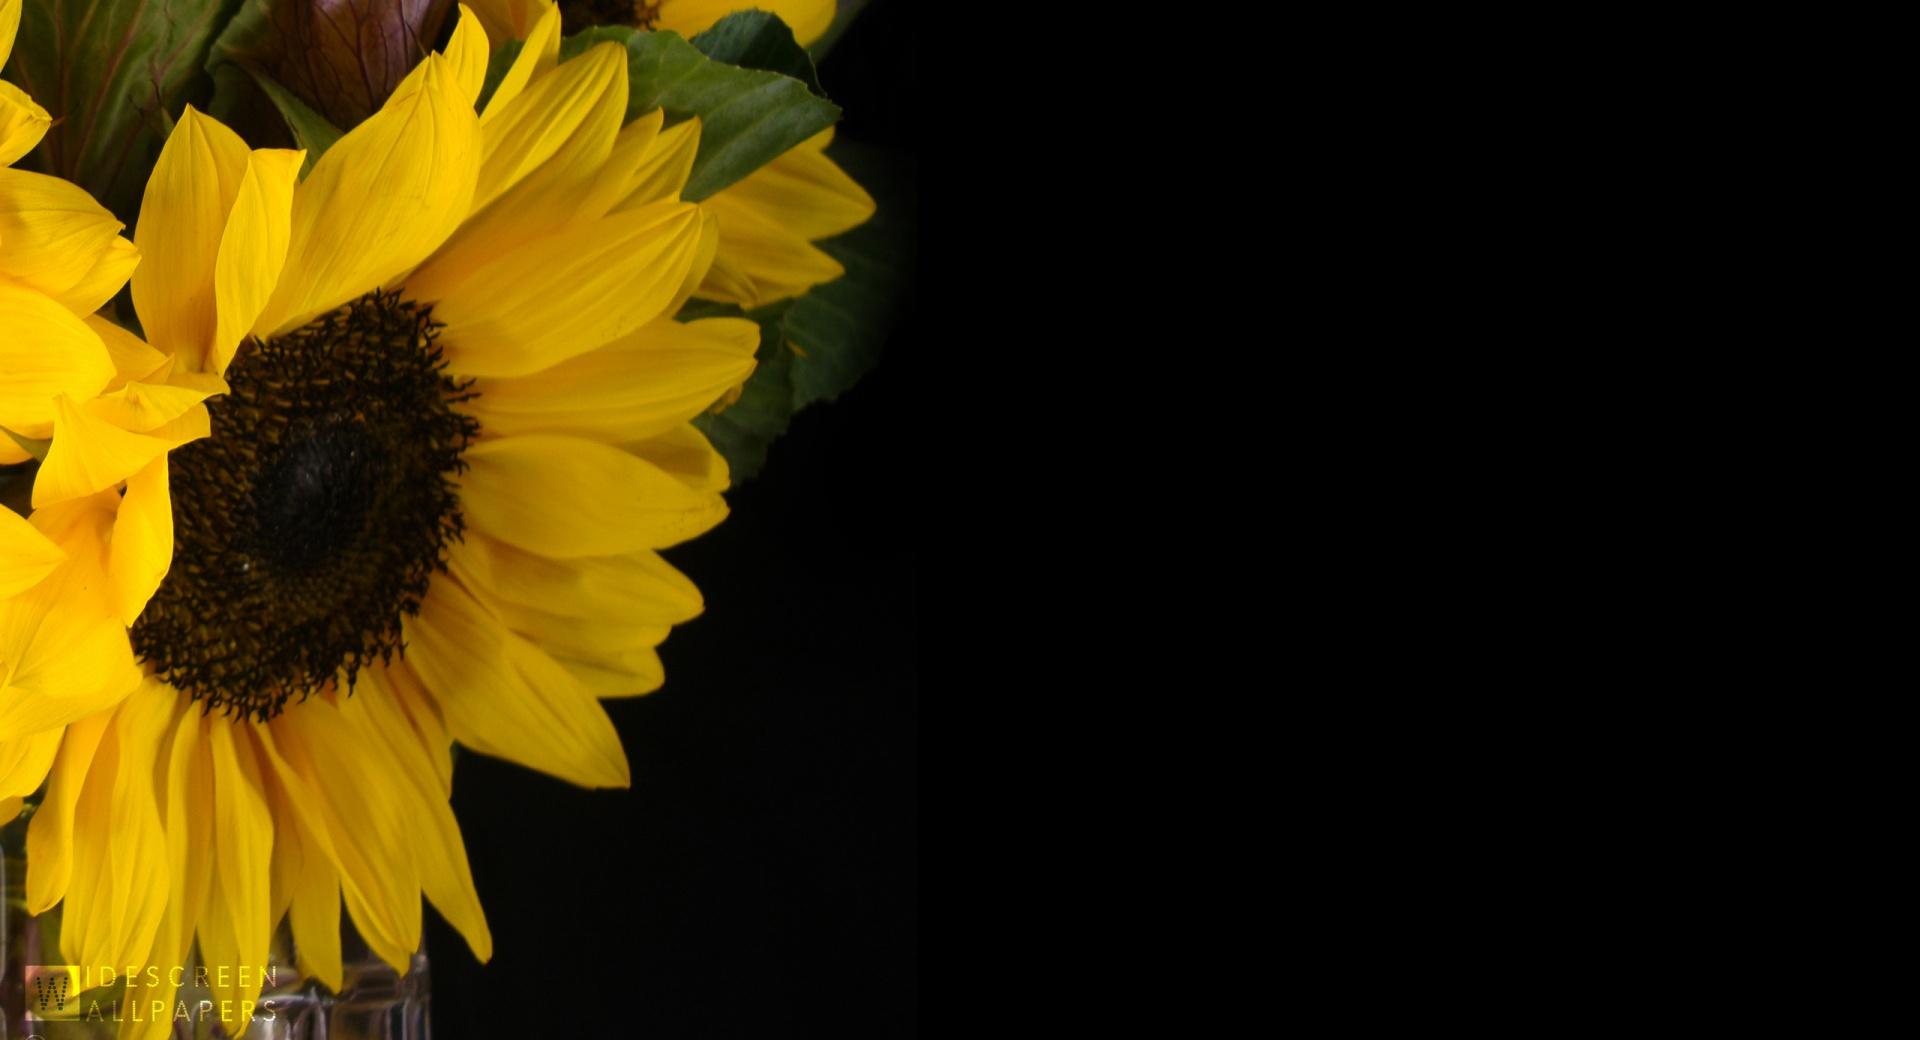 Sunflower and Kale in a Vase wallpapers HD quality